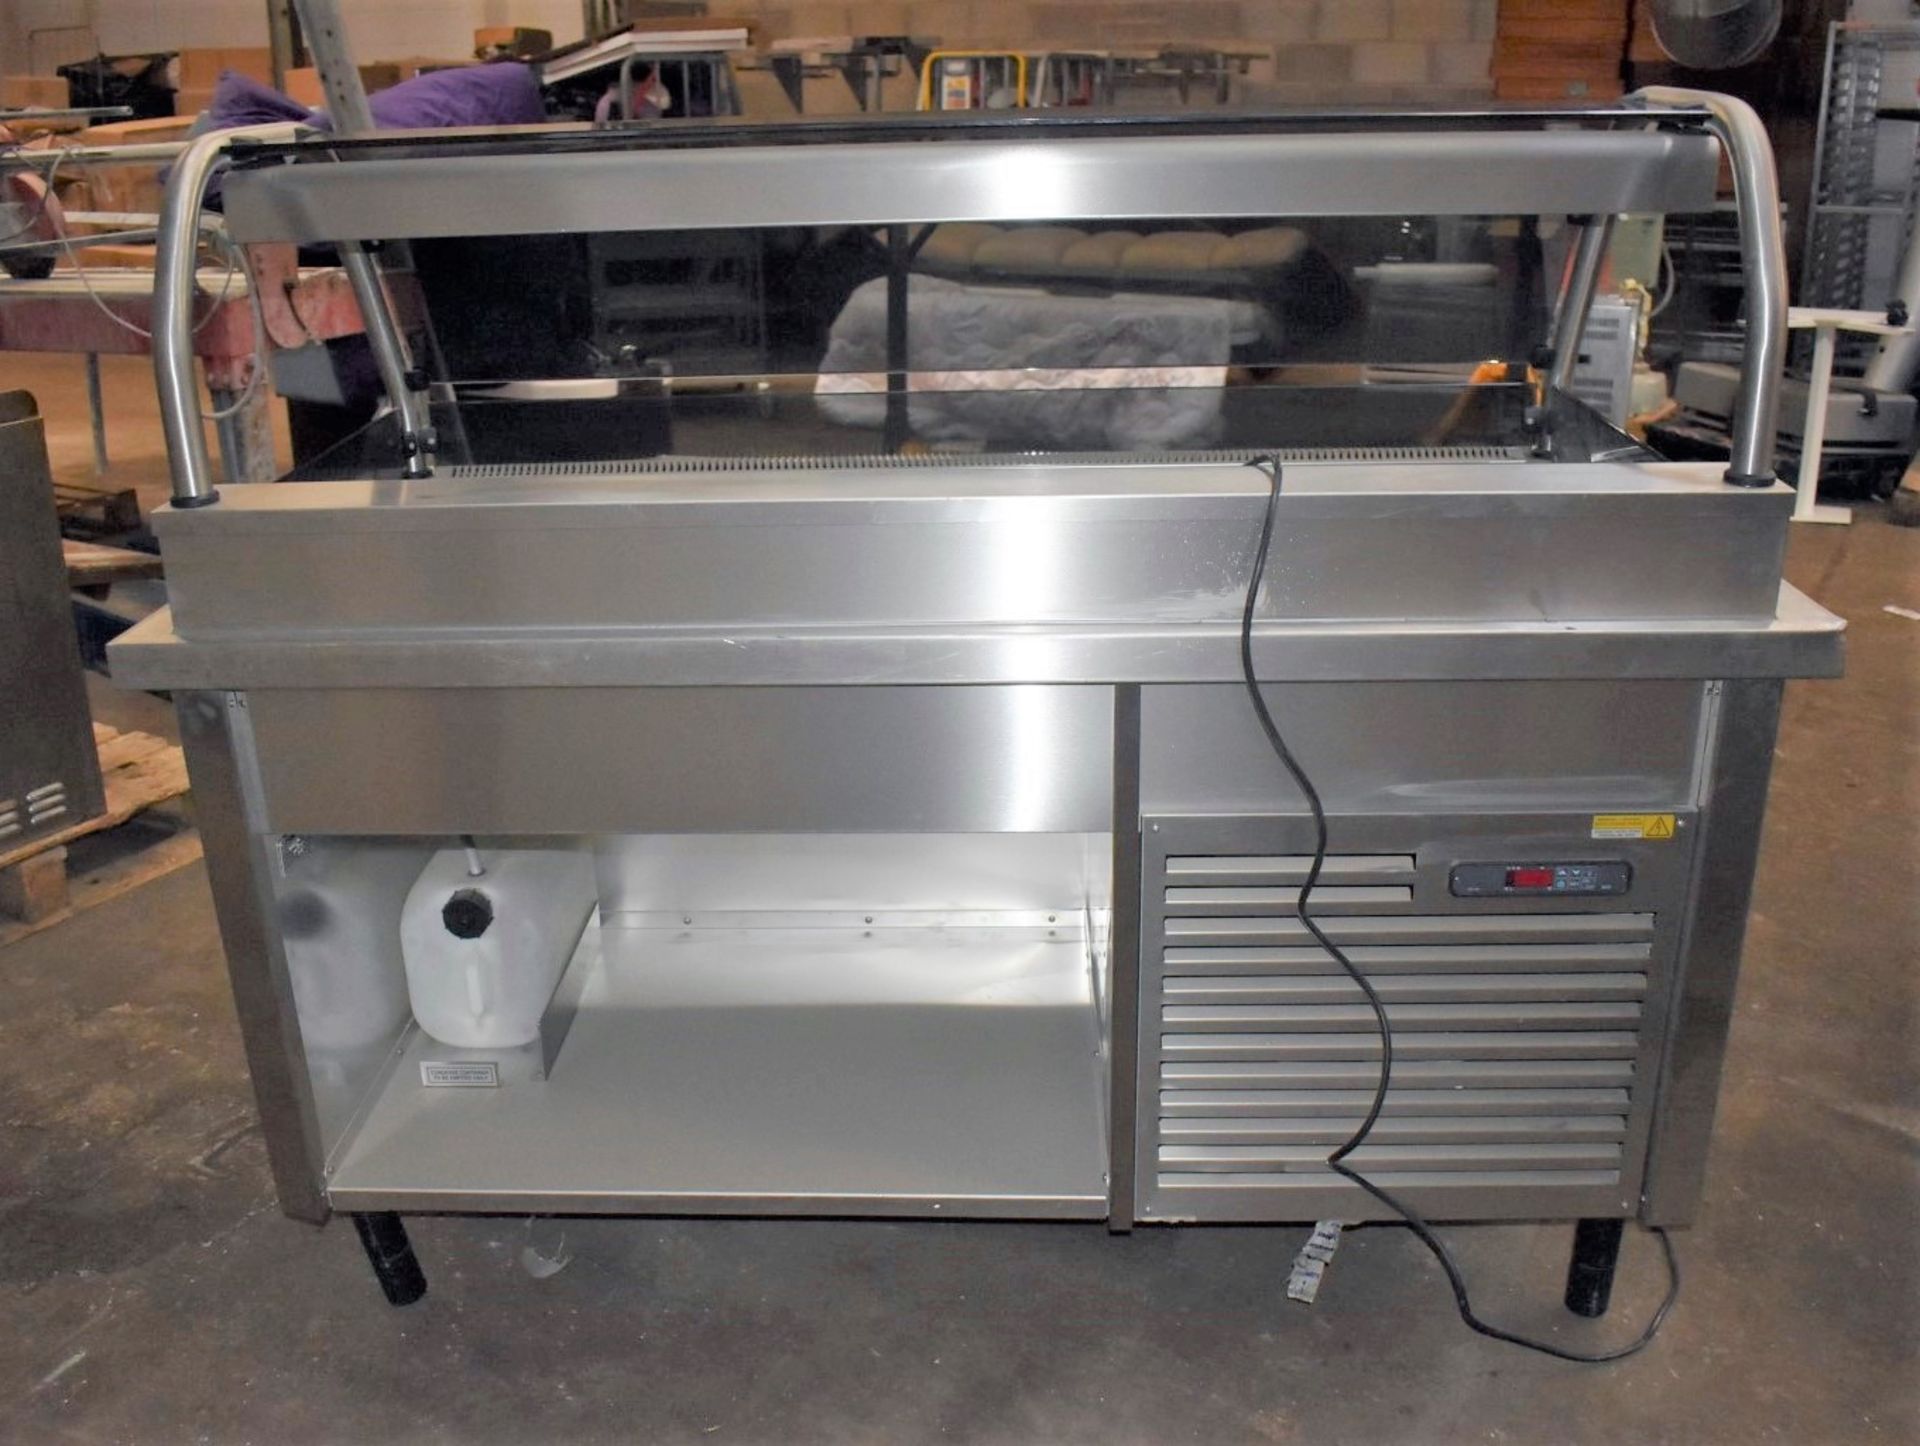 1 x Grundy Commercial Refrigerated Servery Unit With Stone Internal Panels - Stainless Steel - Image 10 of 18